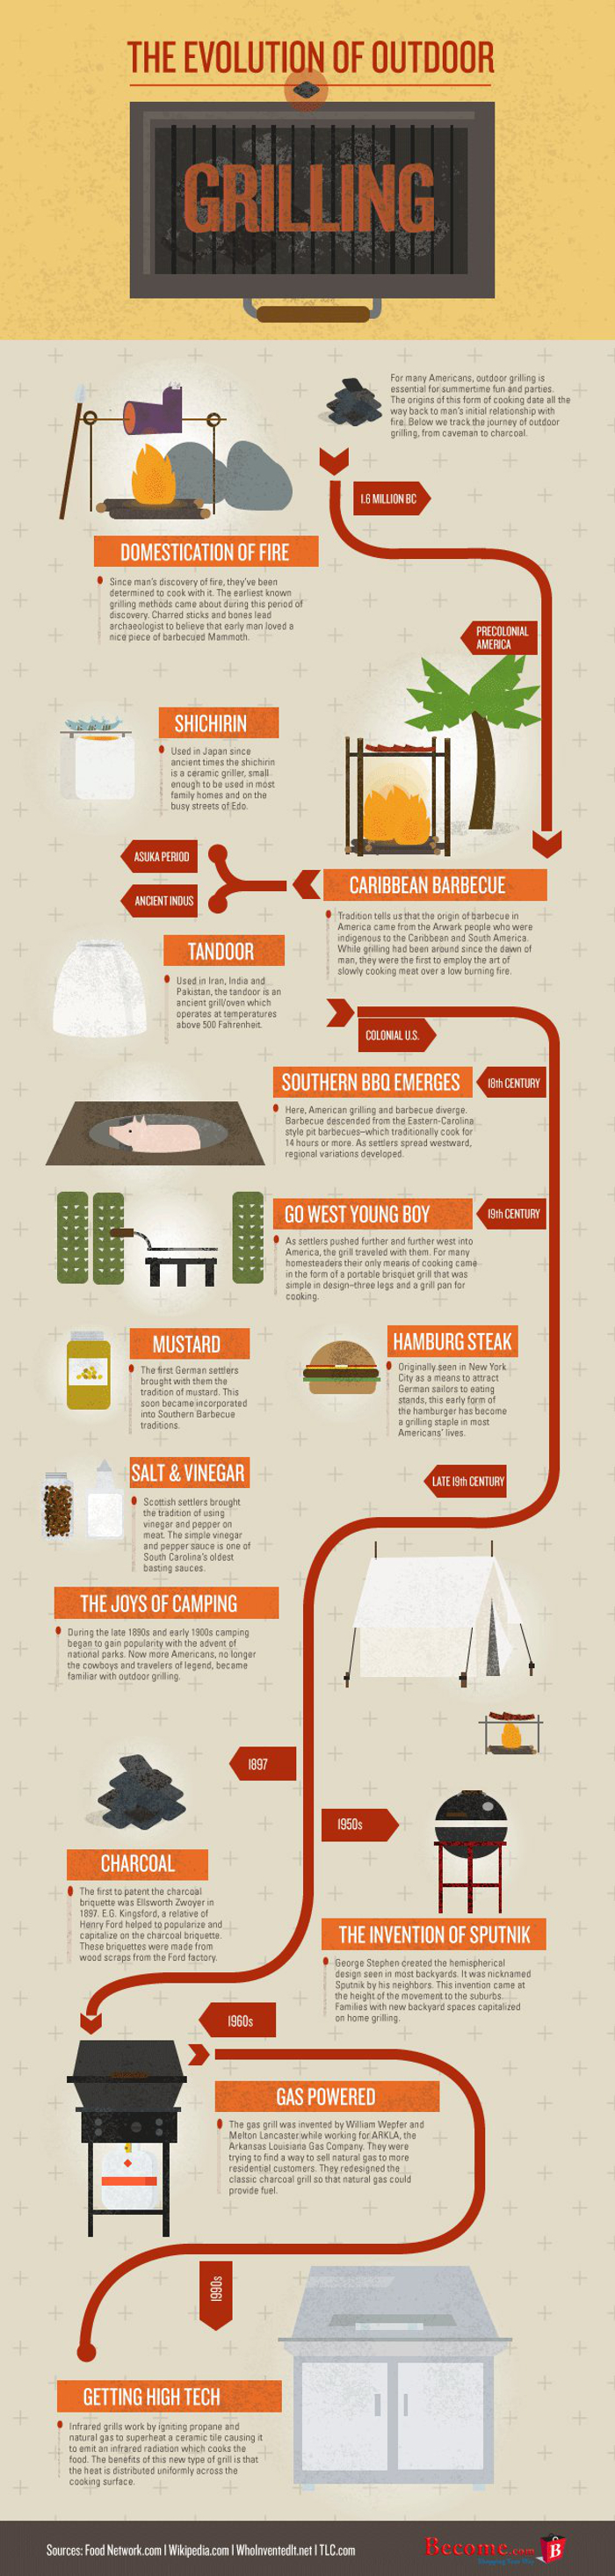 The Evolution Of Outdoor Grilling